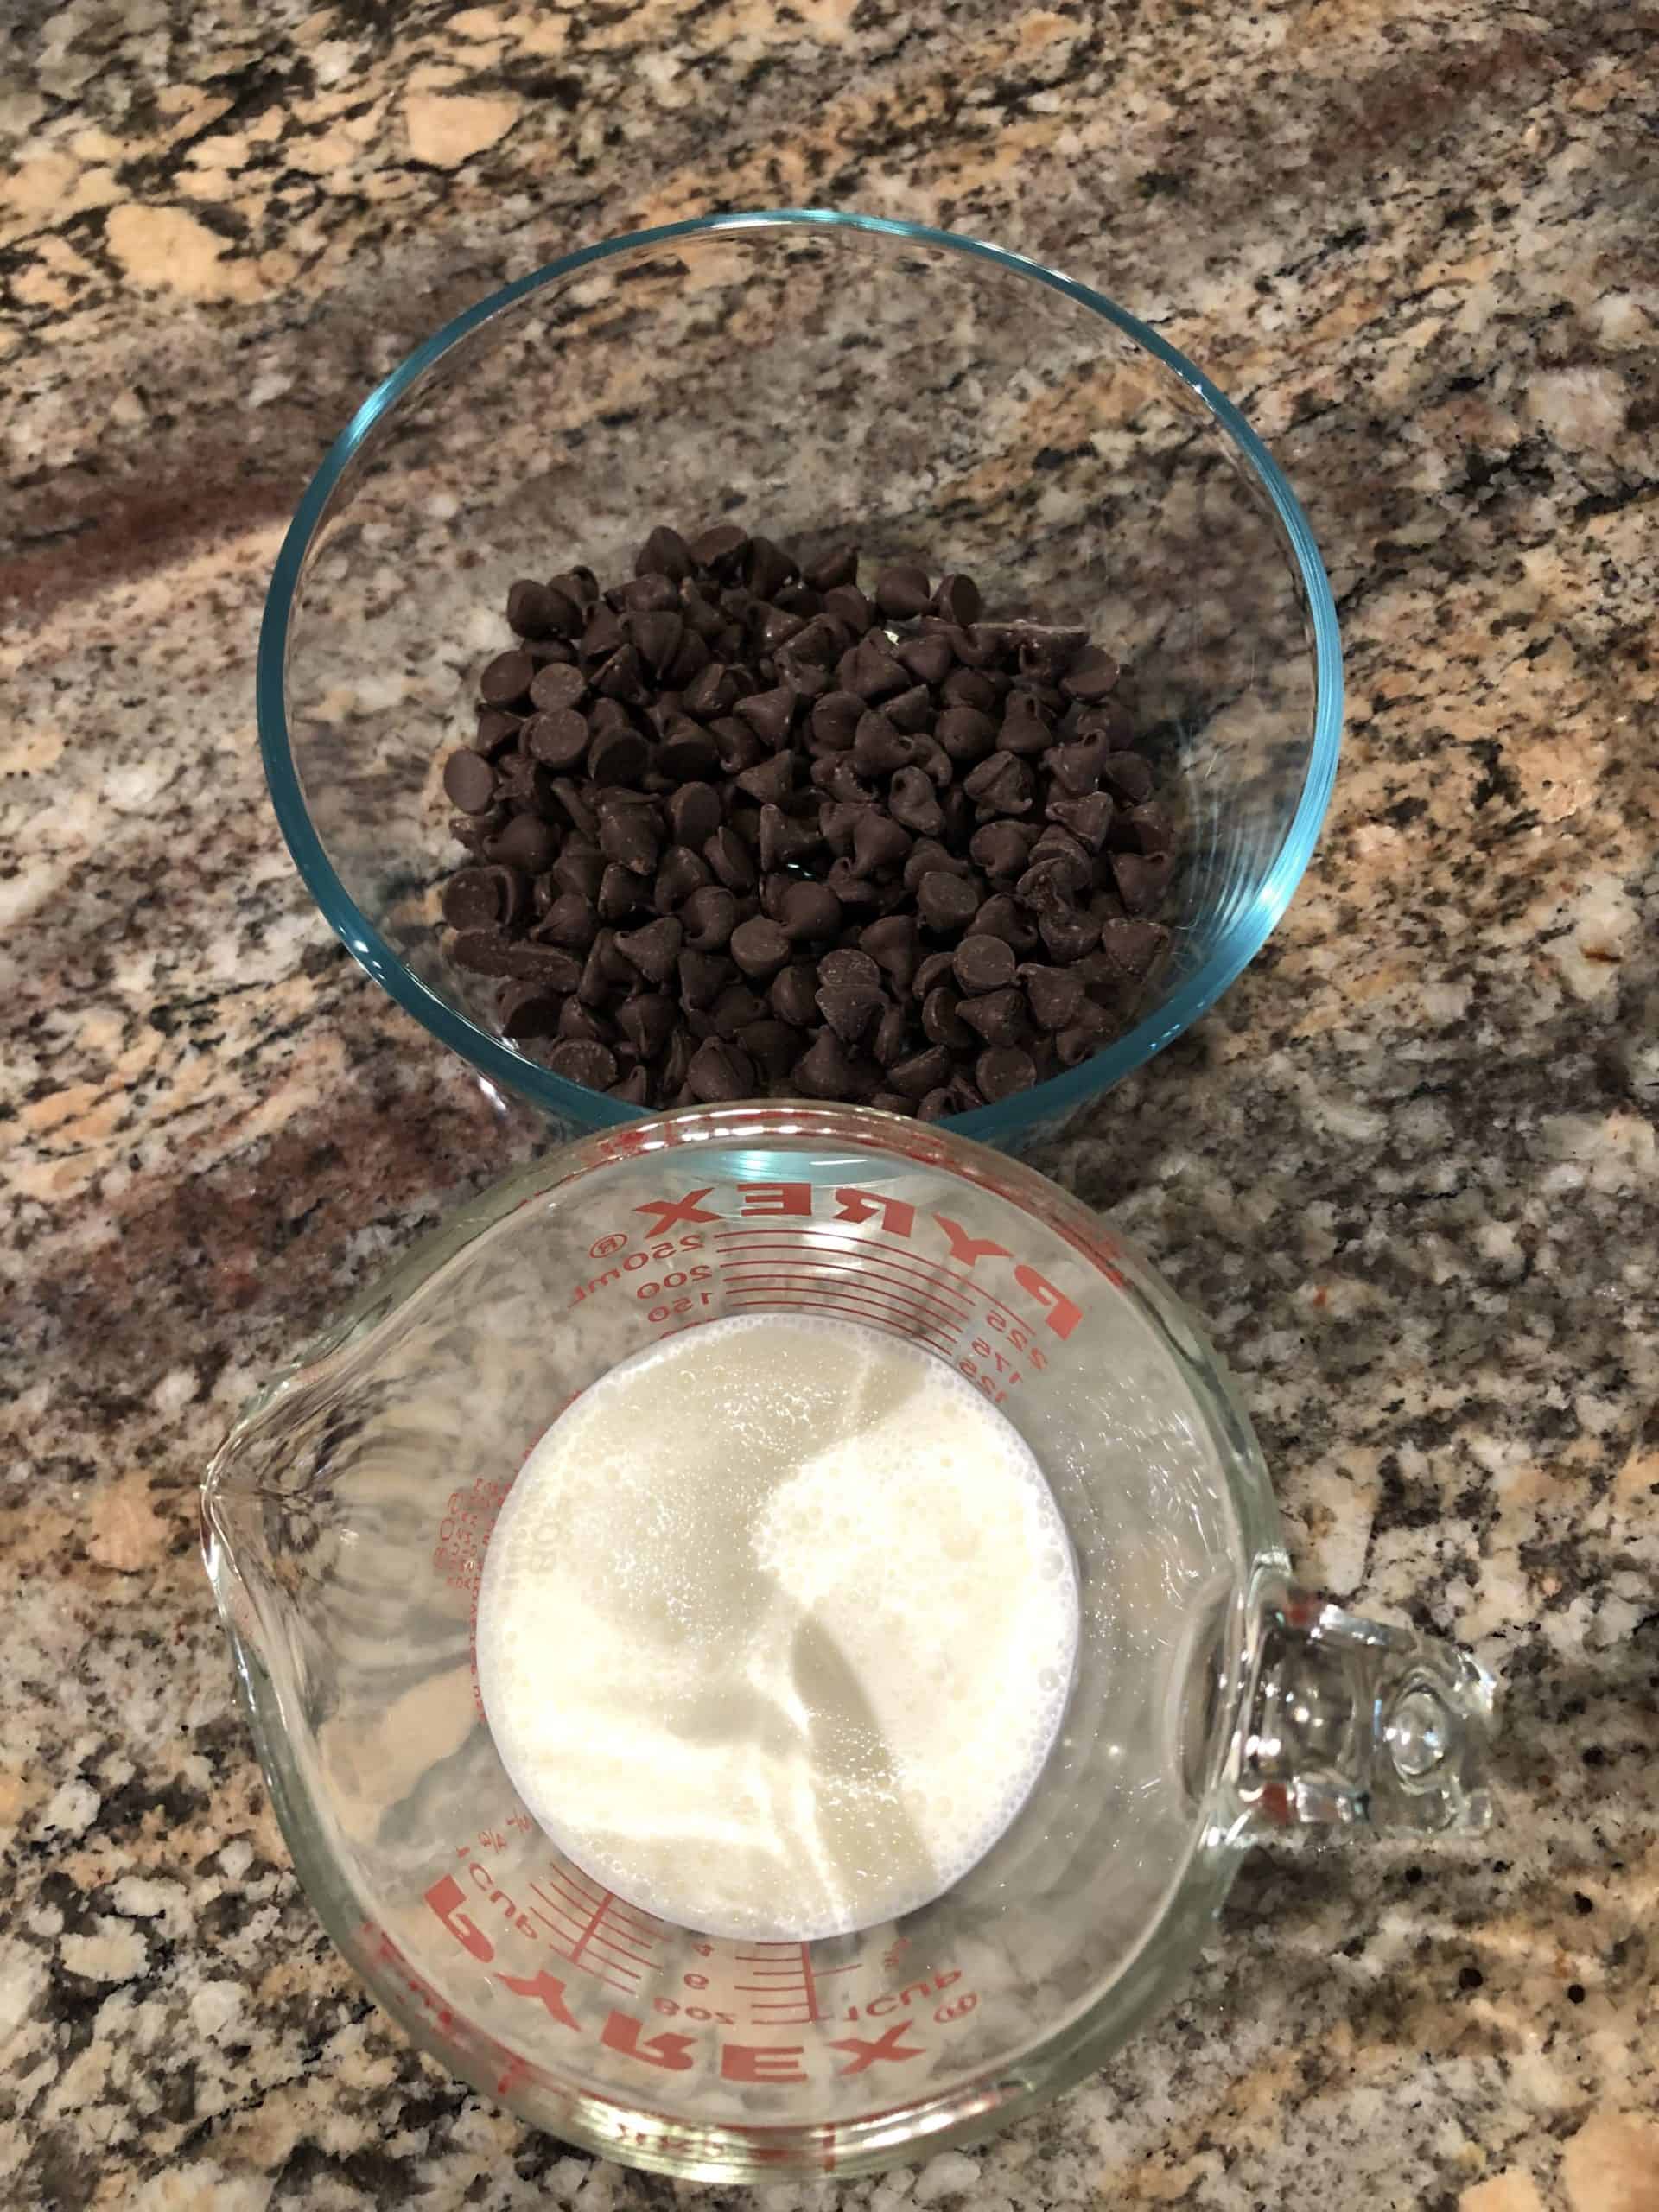 Heavy Cream and Semi Sweet Chocolate Chips in their own bowls